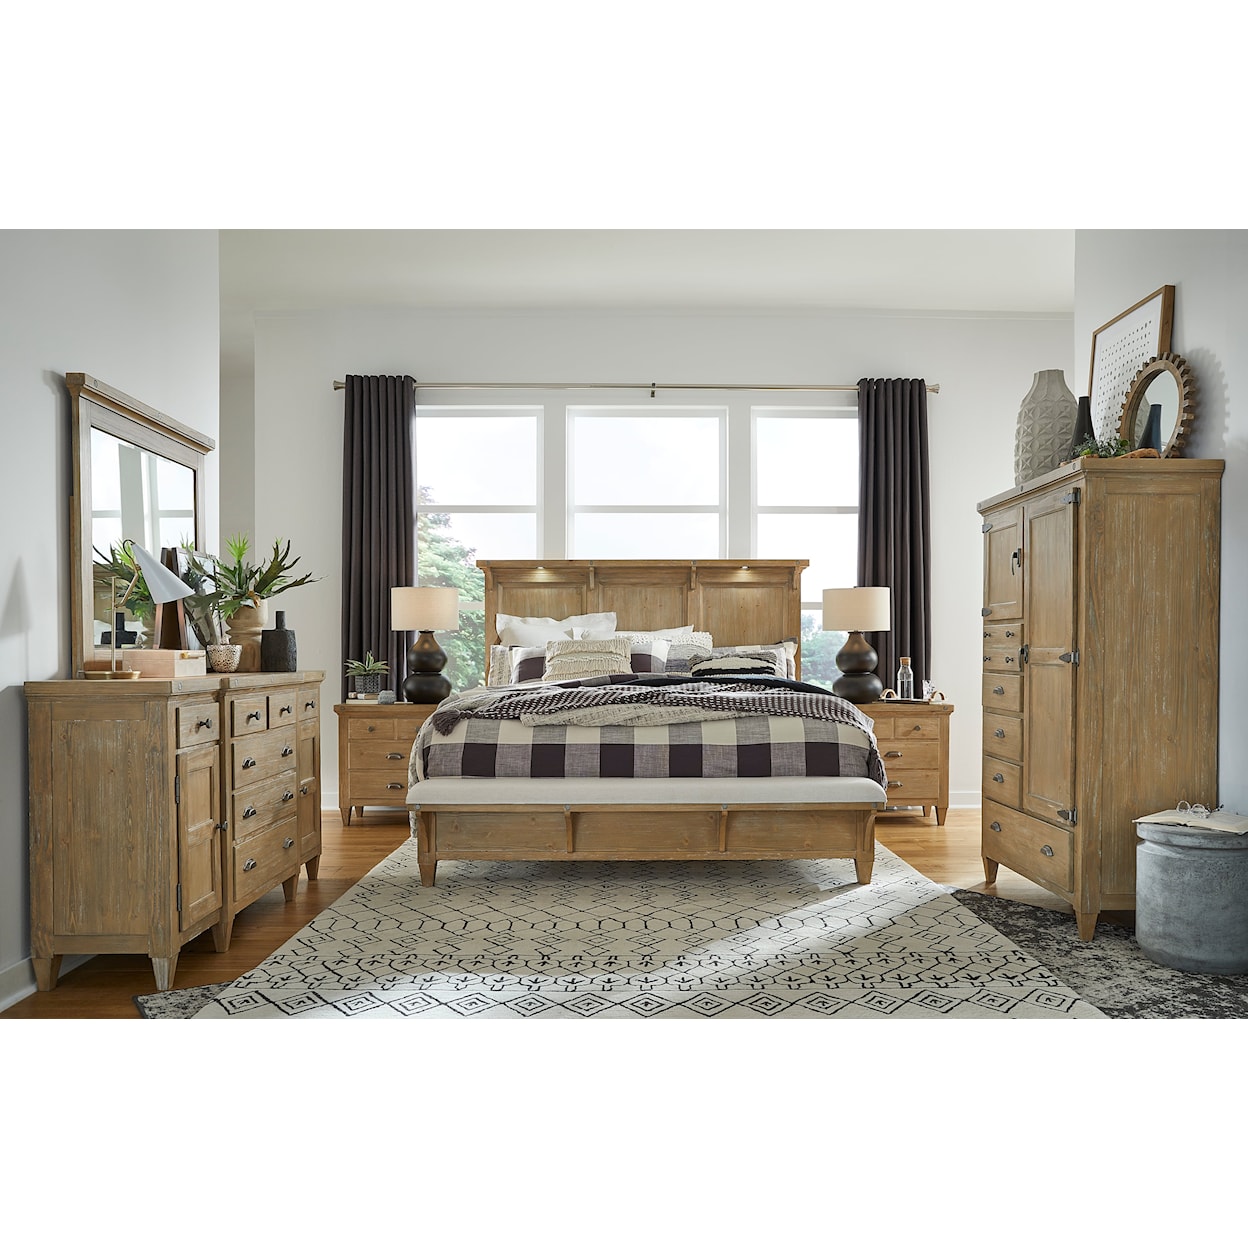 Magnussen Home Lynnfield Bedroom Queen Lighted Panel Bed with Bench